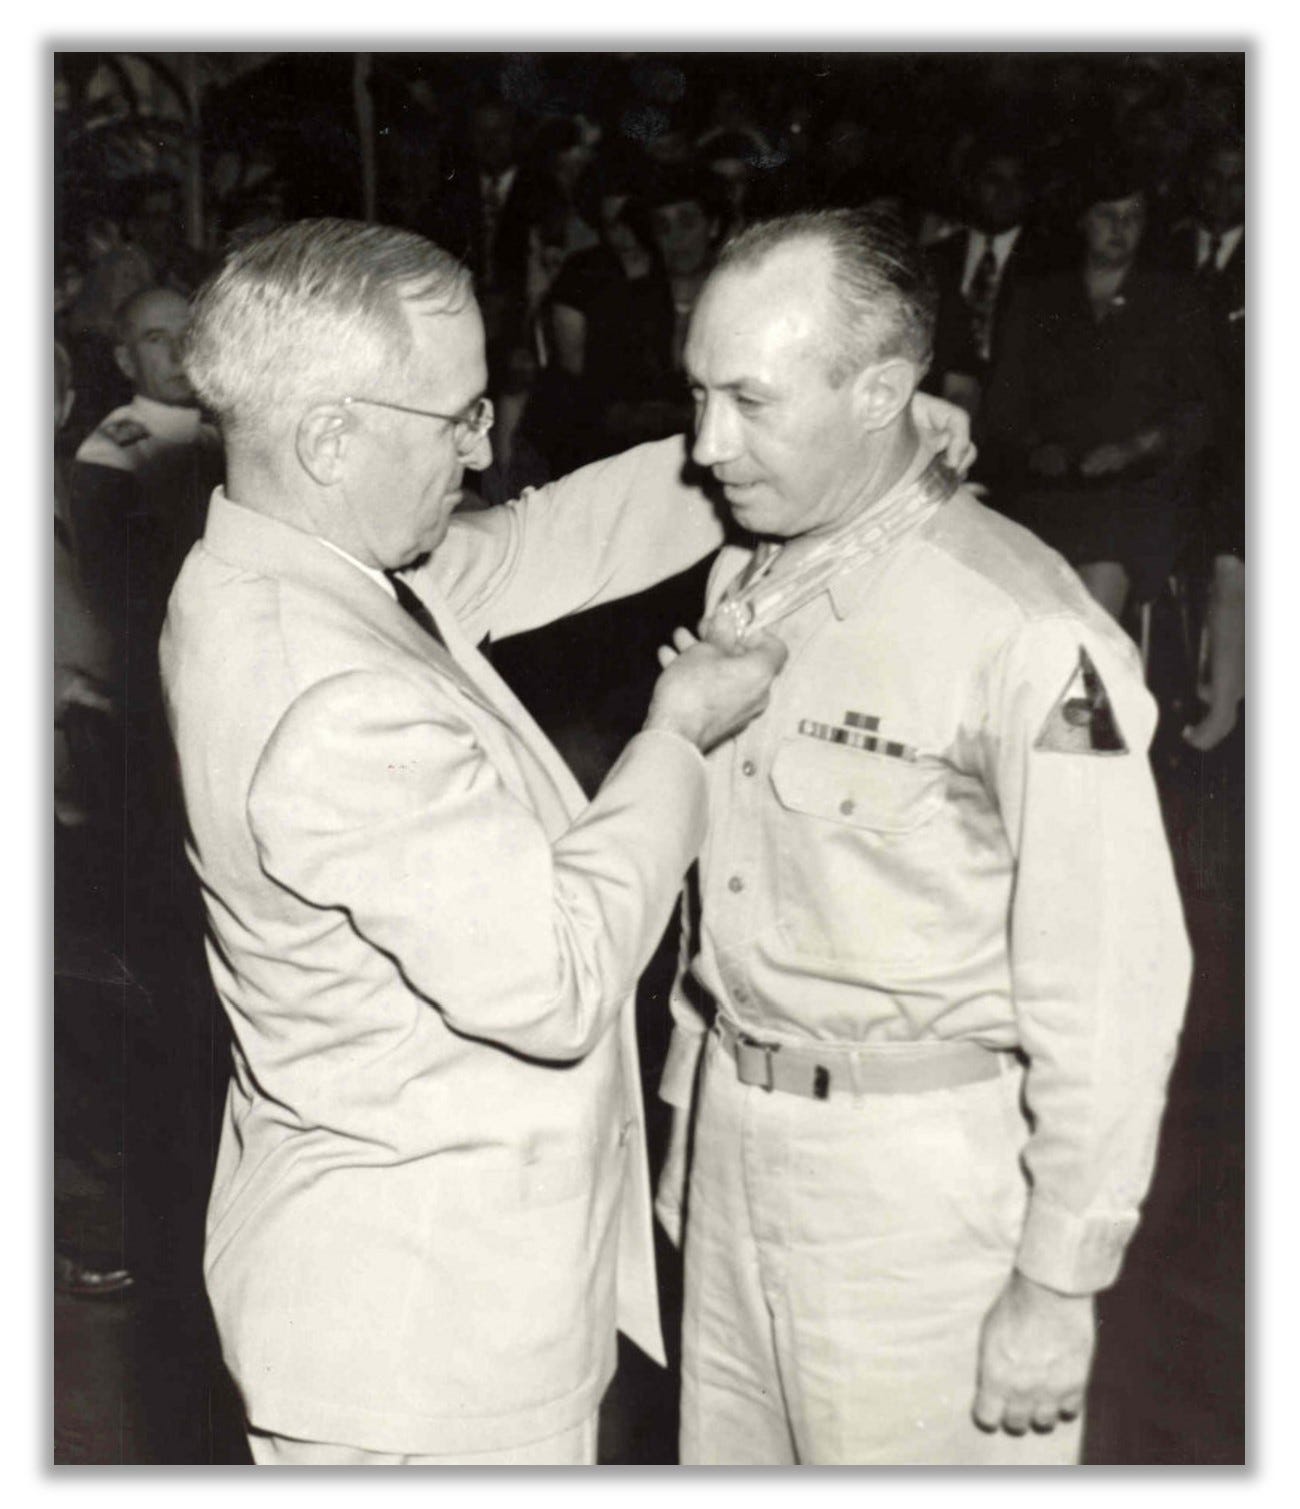 Harry S Truman hangs a Medal of Honor around George Turner's neck.